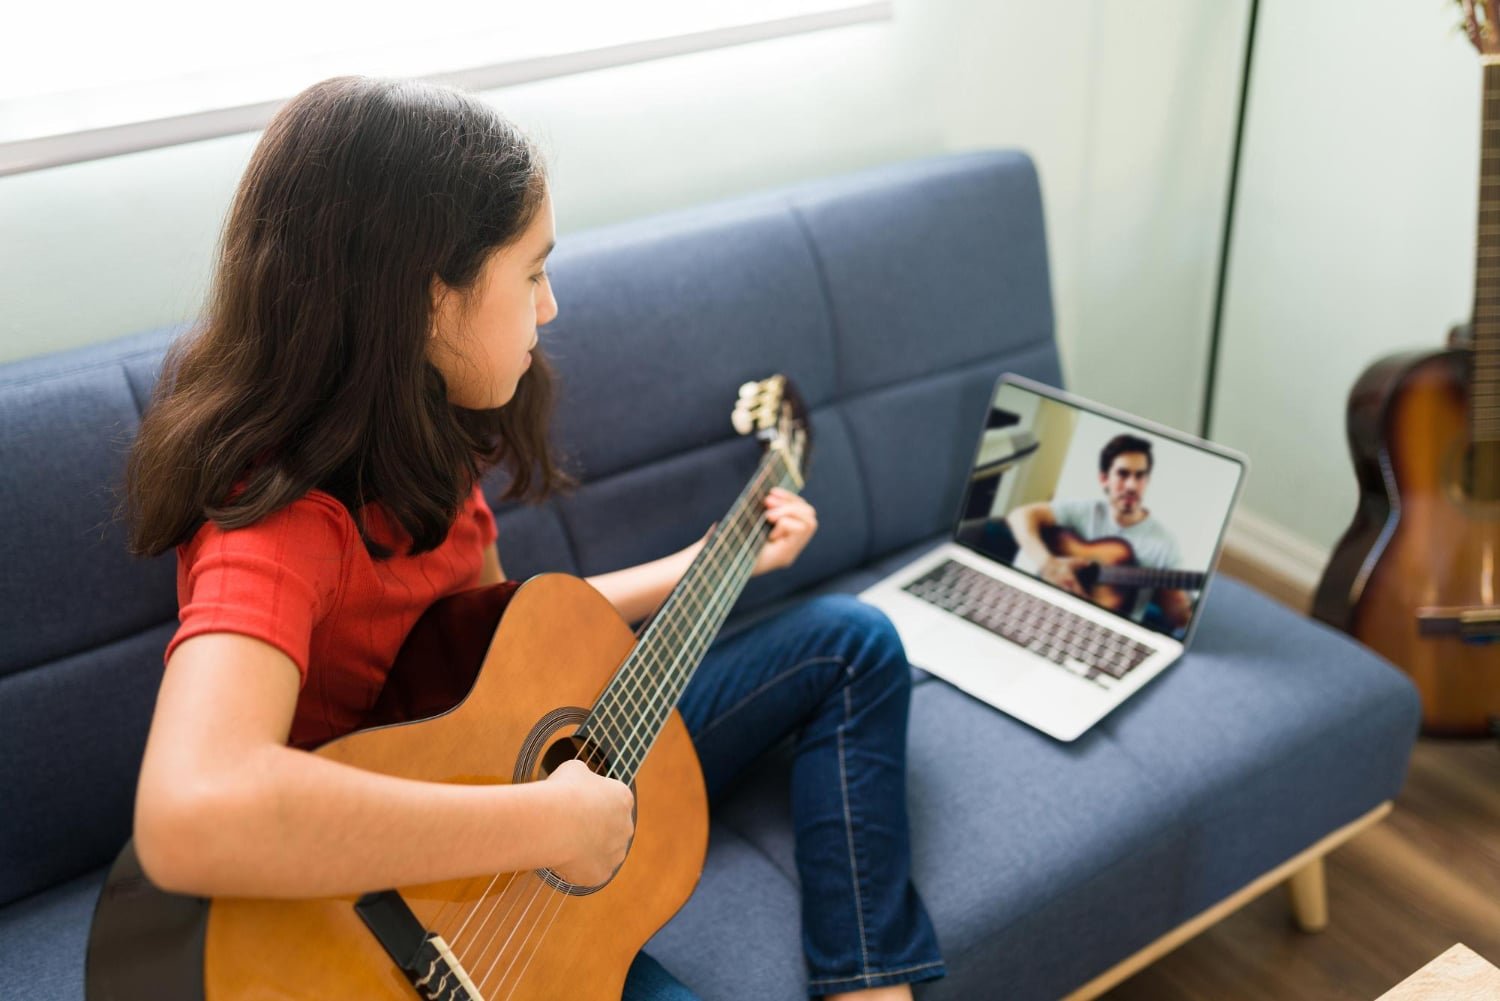 Learn To Play Guitar With Fender Play’s Online Lessons